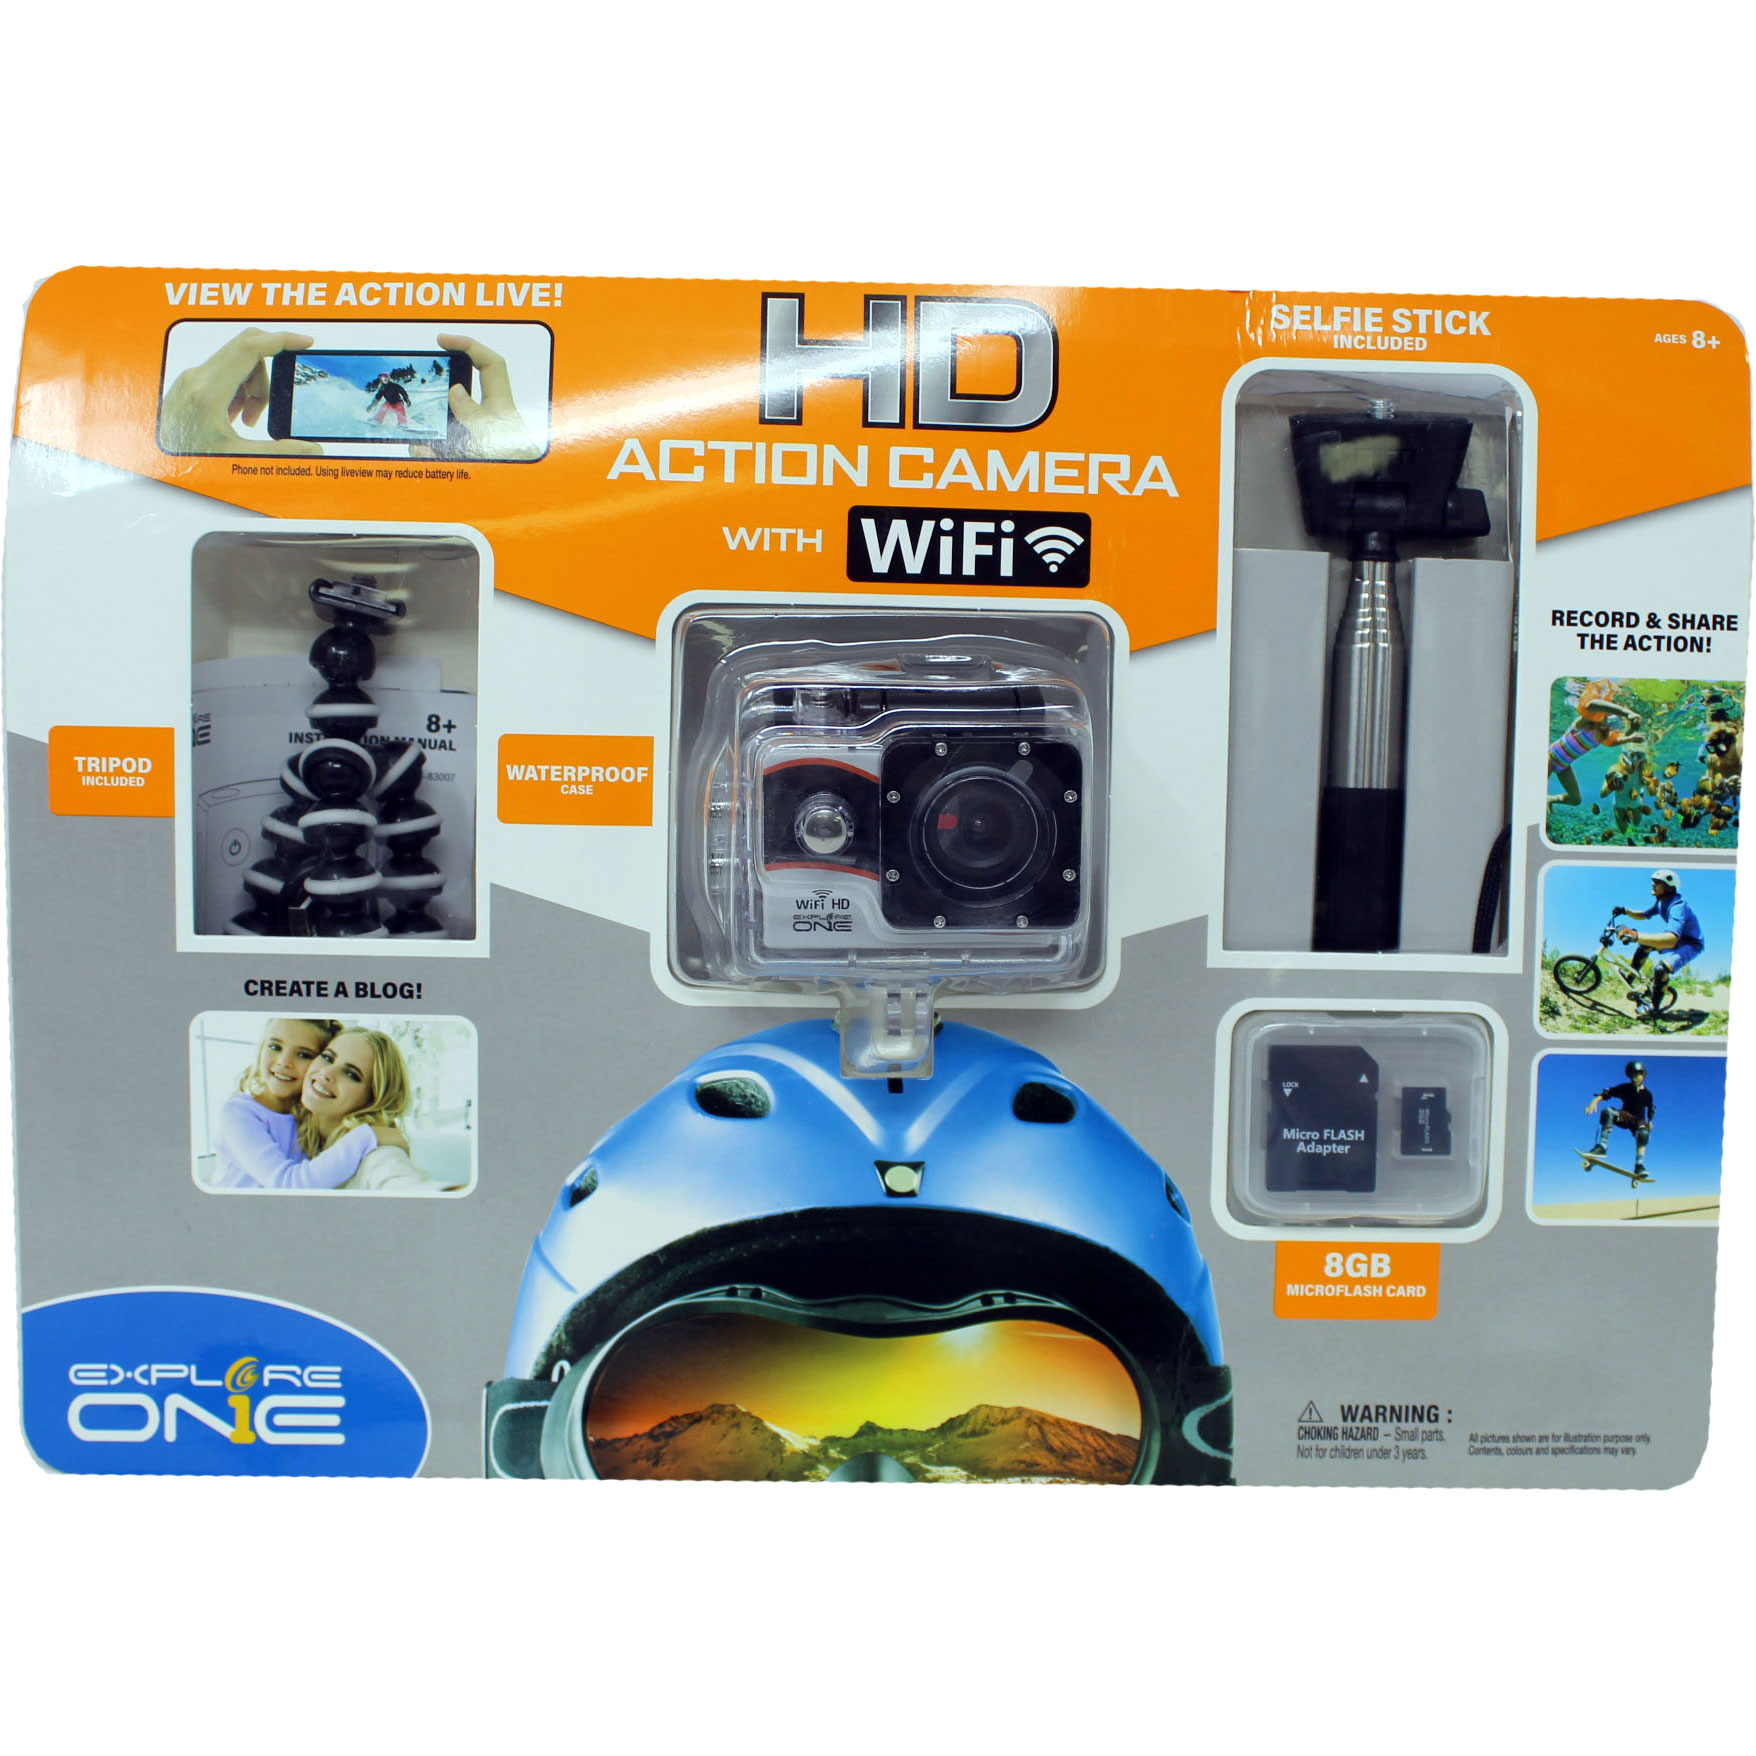 Explore One HD Action Camera with WiFi Includes Tripod Selfie Stick Accessories 